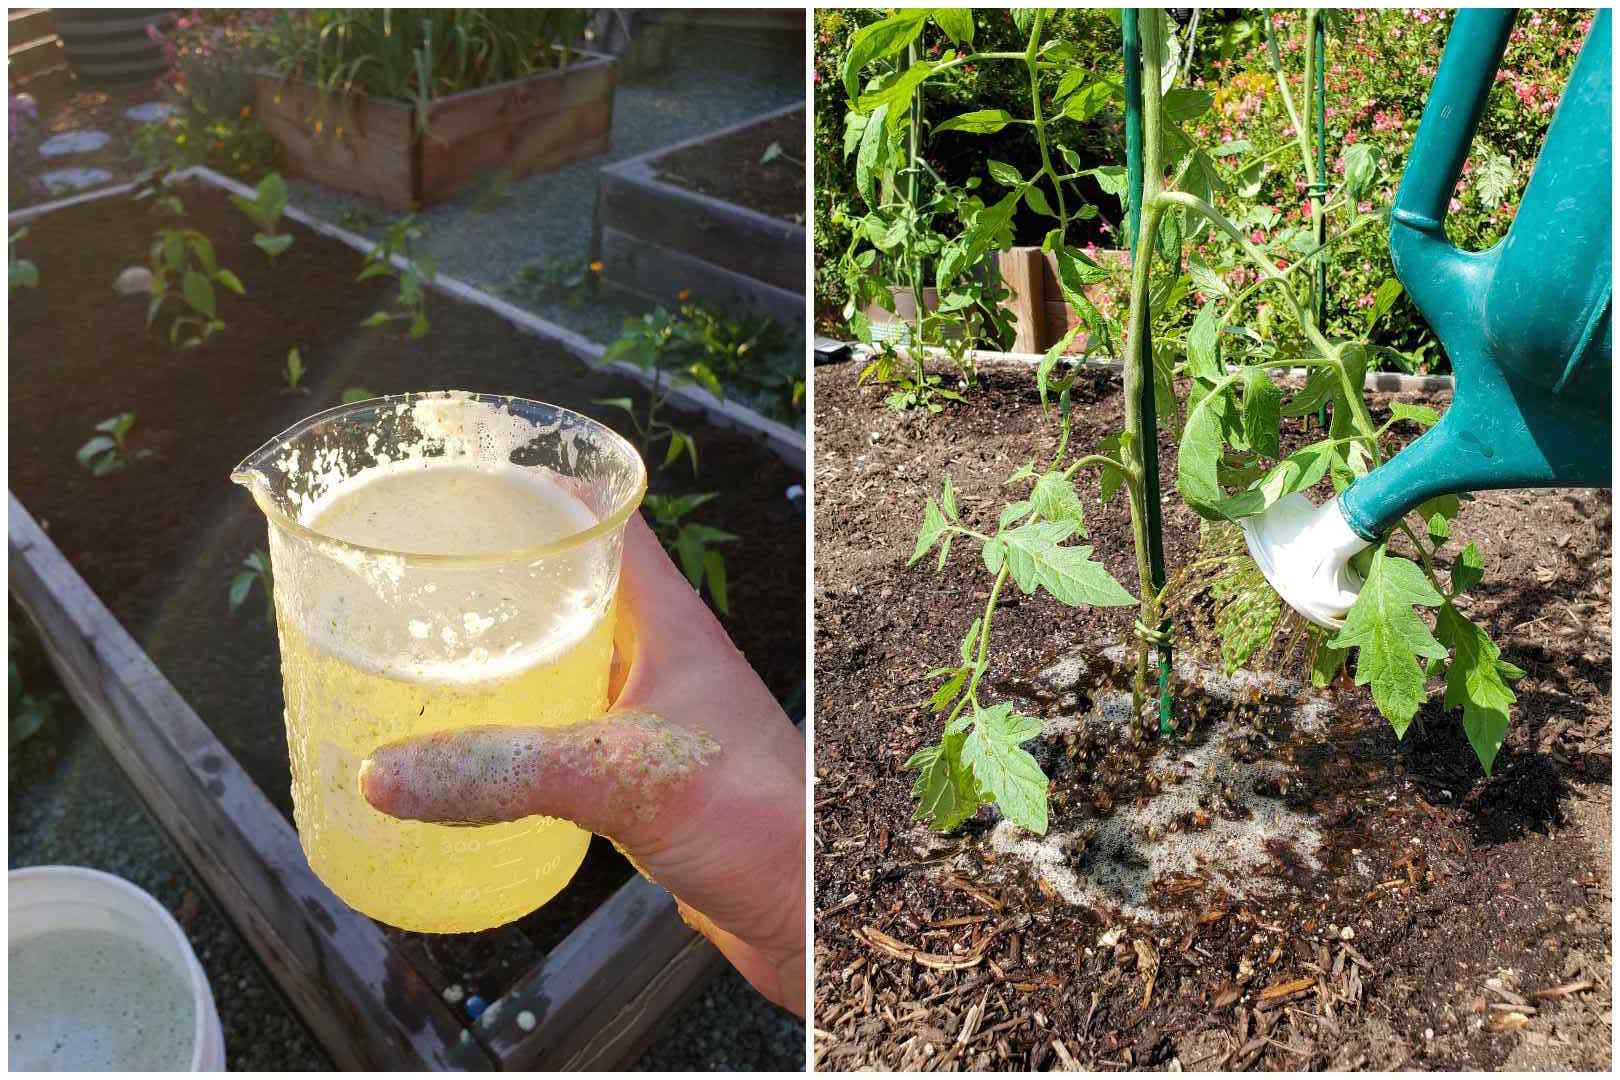 A two part image, the first image shows a hand holding a glass beaker that is full of frothy fresh aloe vera tea that will be fed to the plants directly behind the featured beaker. There is a bucket in the foreground with the remaining aloe vera tea that will be used as a soil drench for the rest of the garden. The second image shows a watering can watering a newly planted tomato in a raised garden bed. When you grow tomatoes, feeding them right from the beginning will go a long way to a bountiful harvest.   